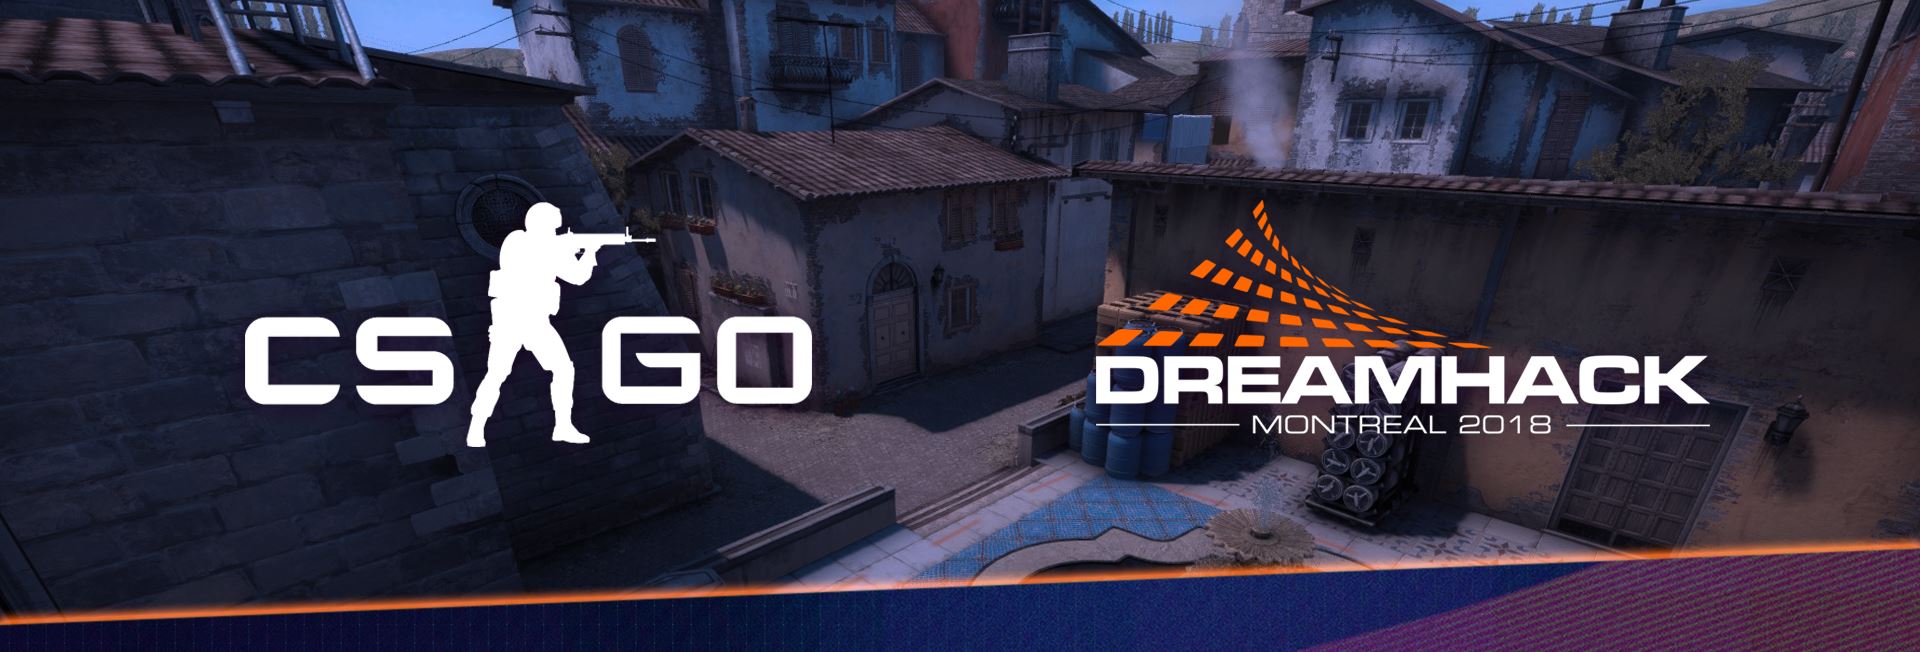 Dreamhack Montreal 2018 - Counter-Strike: Global Offensive